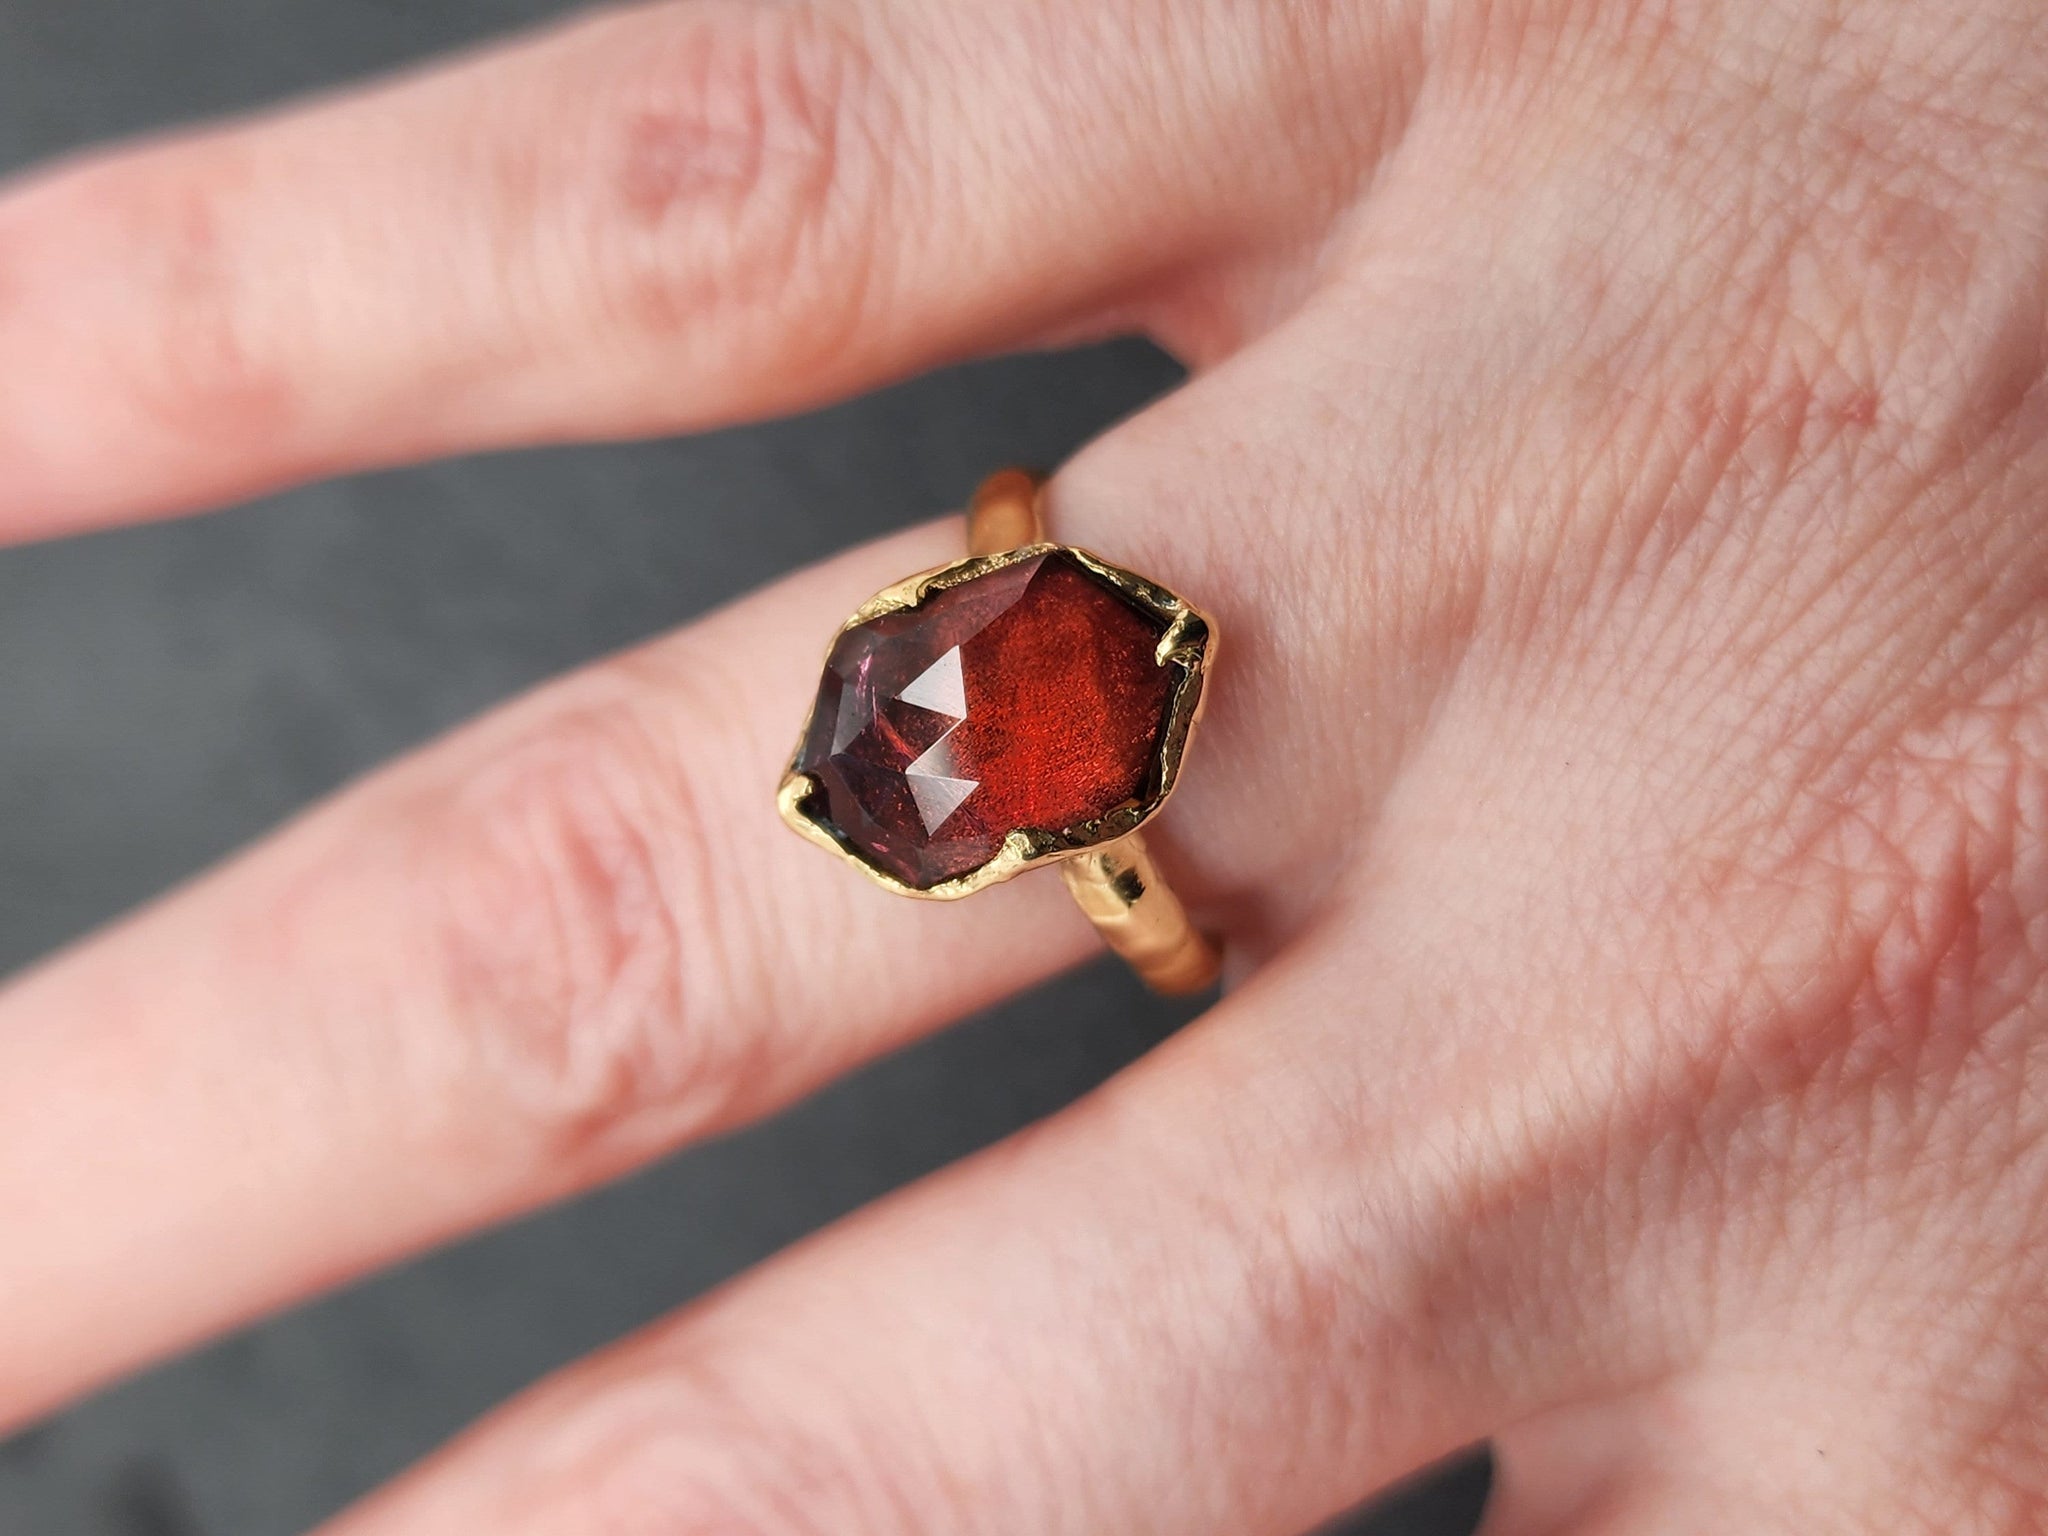 Fancy cut red Tourmaline Yellow Gold Ring Gemstone Solitaire recycled 18k statement cocktail statement 3327